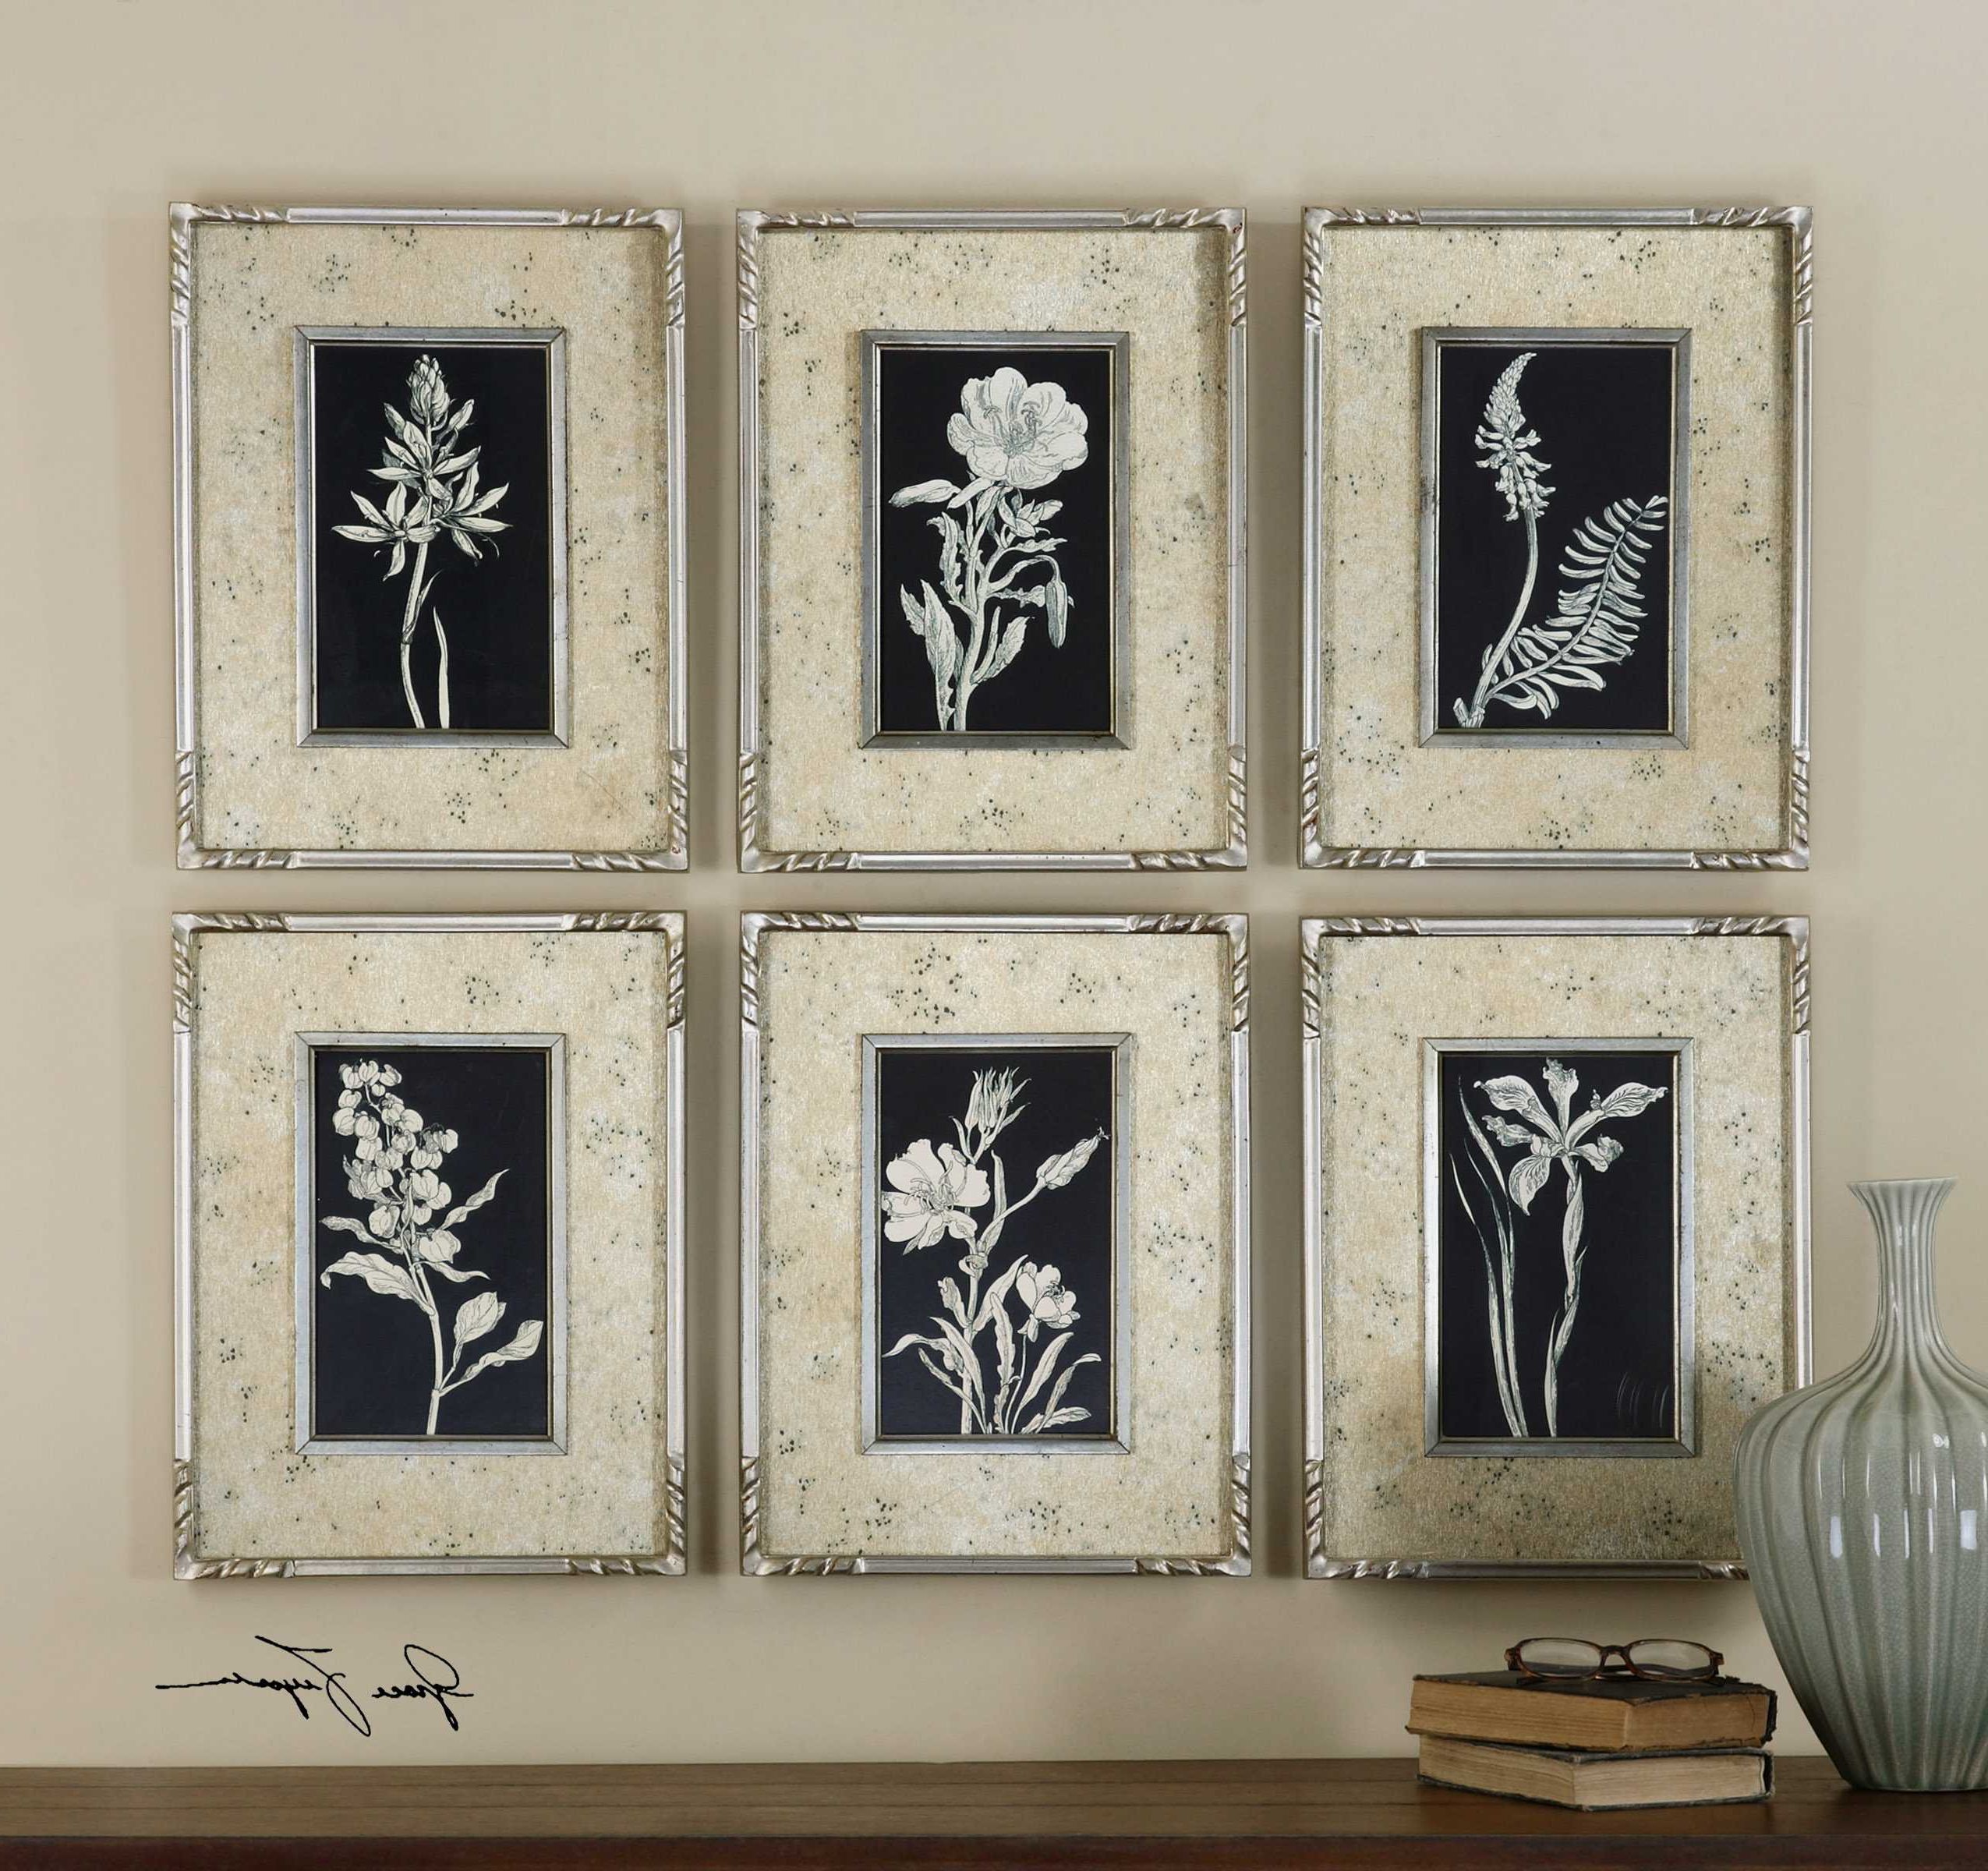 Uttermost Glowing Florals Framed Wall Art (6 Piece Set Pertaining To Most Recently Released Wall Framed Art Prints (View 8 of 20)